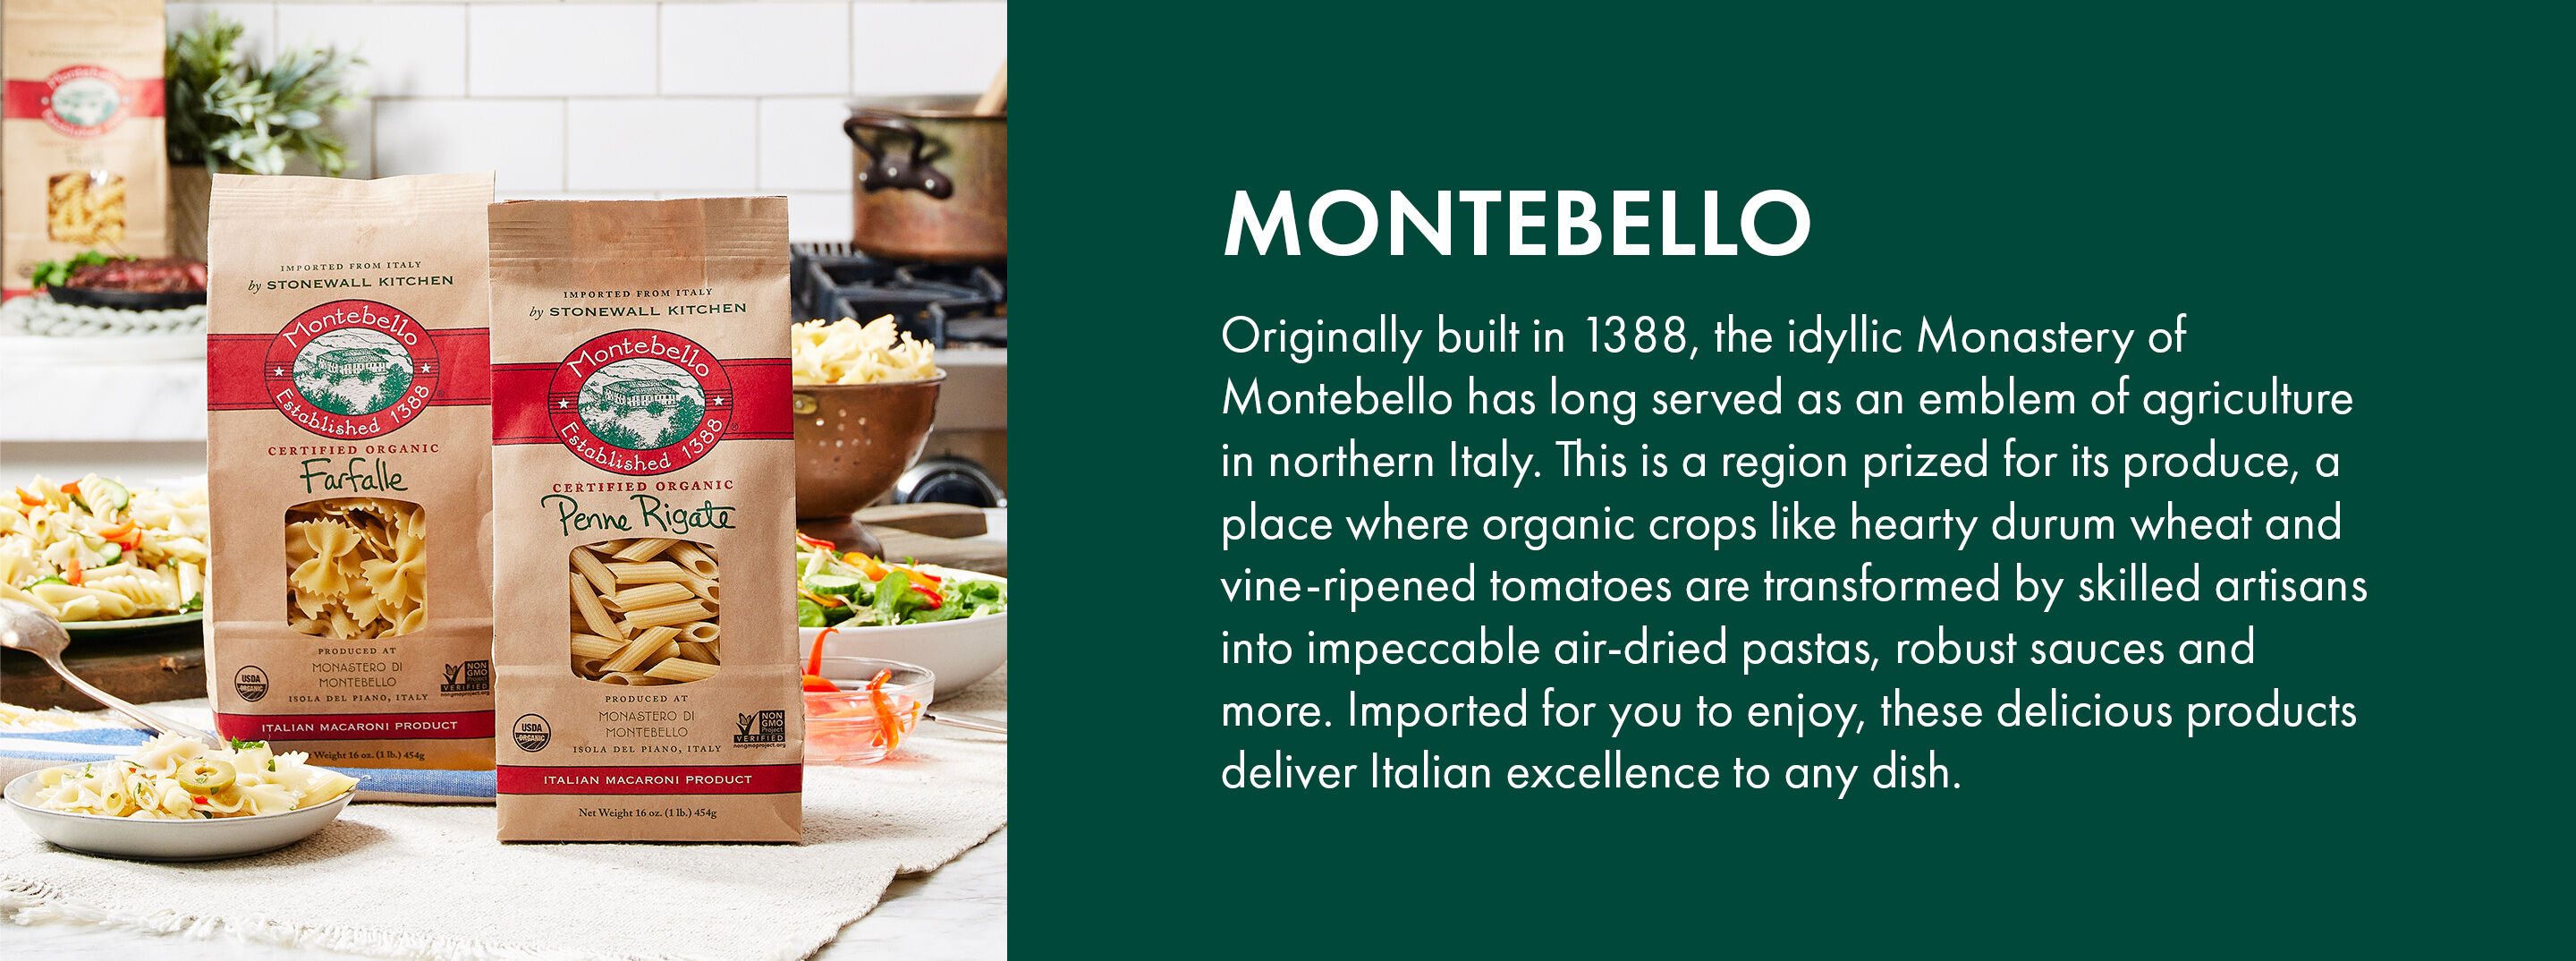 Montebello | Originally built in 1388, the idyllic Monastery of Montebello has long served as an emblem of agriculture in northern Italy. This is a region prized for its produce, a place where organic crops like hearty durum wheat and vine-ripened tomatoes are transformed by skilled artisans into impeccable air-dried pastas, robust sauces and more. Imported for you to enjoy, these delicious products deliver Italian excellence to any dish.